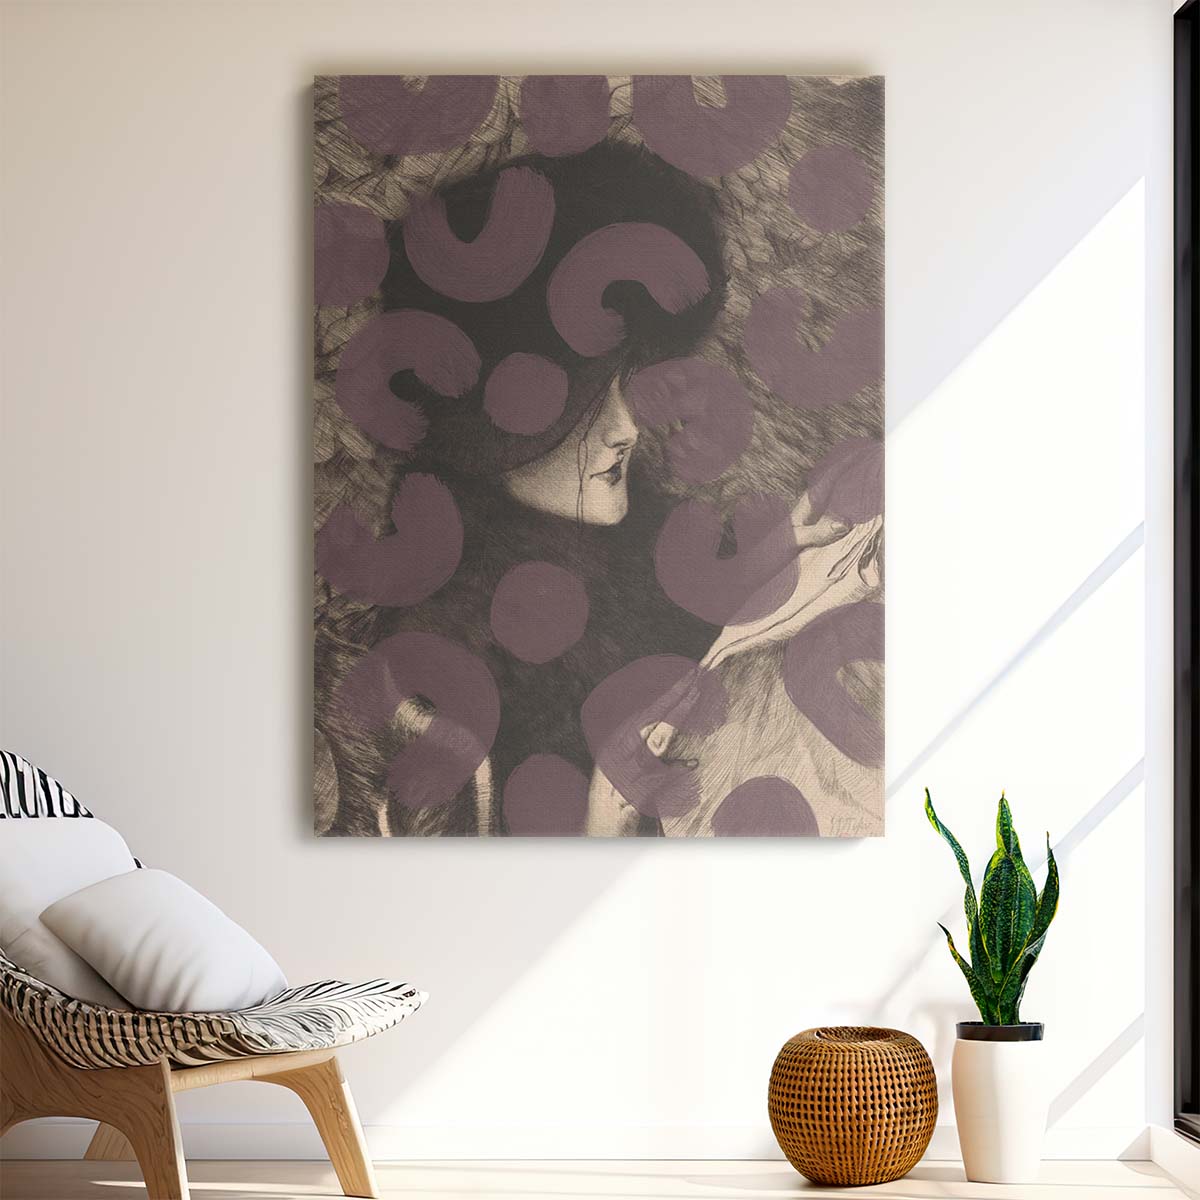 Romantic Modern Abstract Woman Illustration Art by Yopie Studio by Luxuriance Designs, made in USA